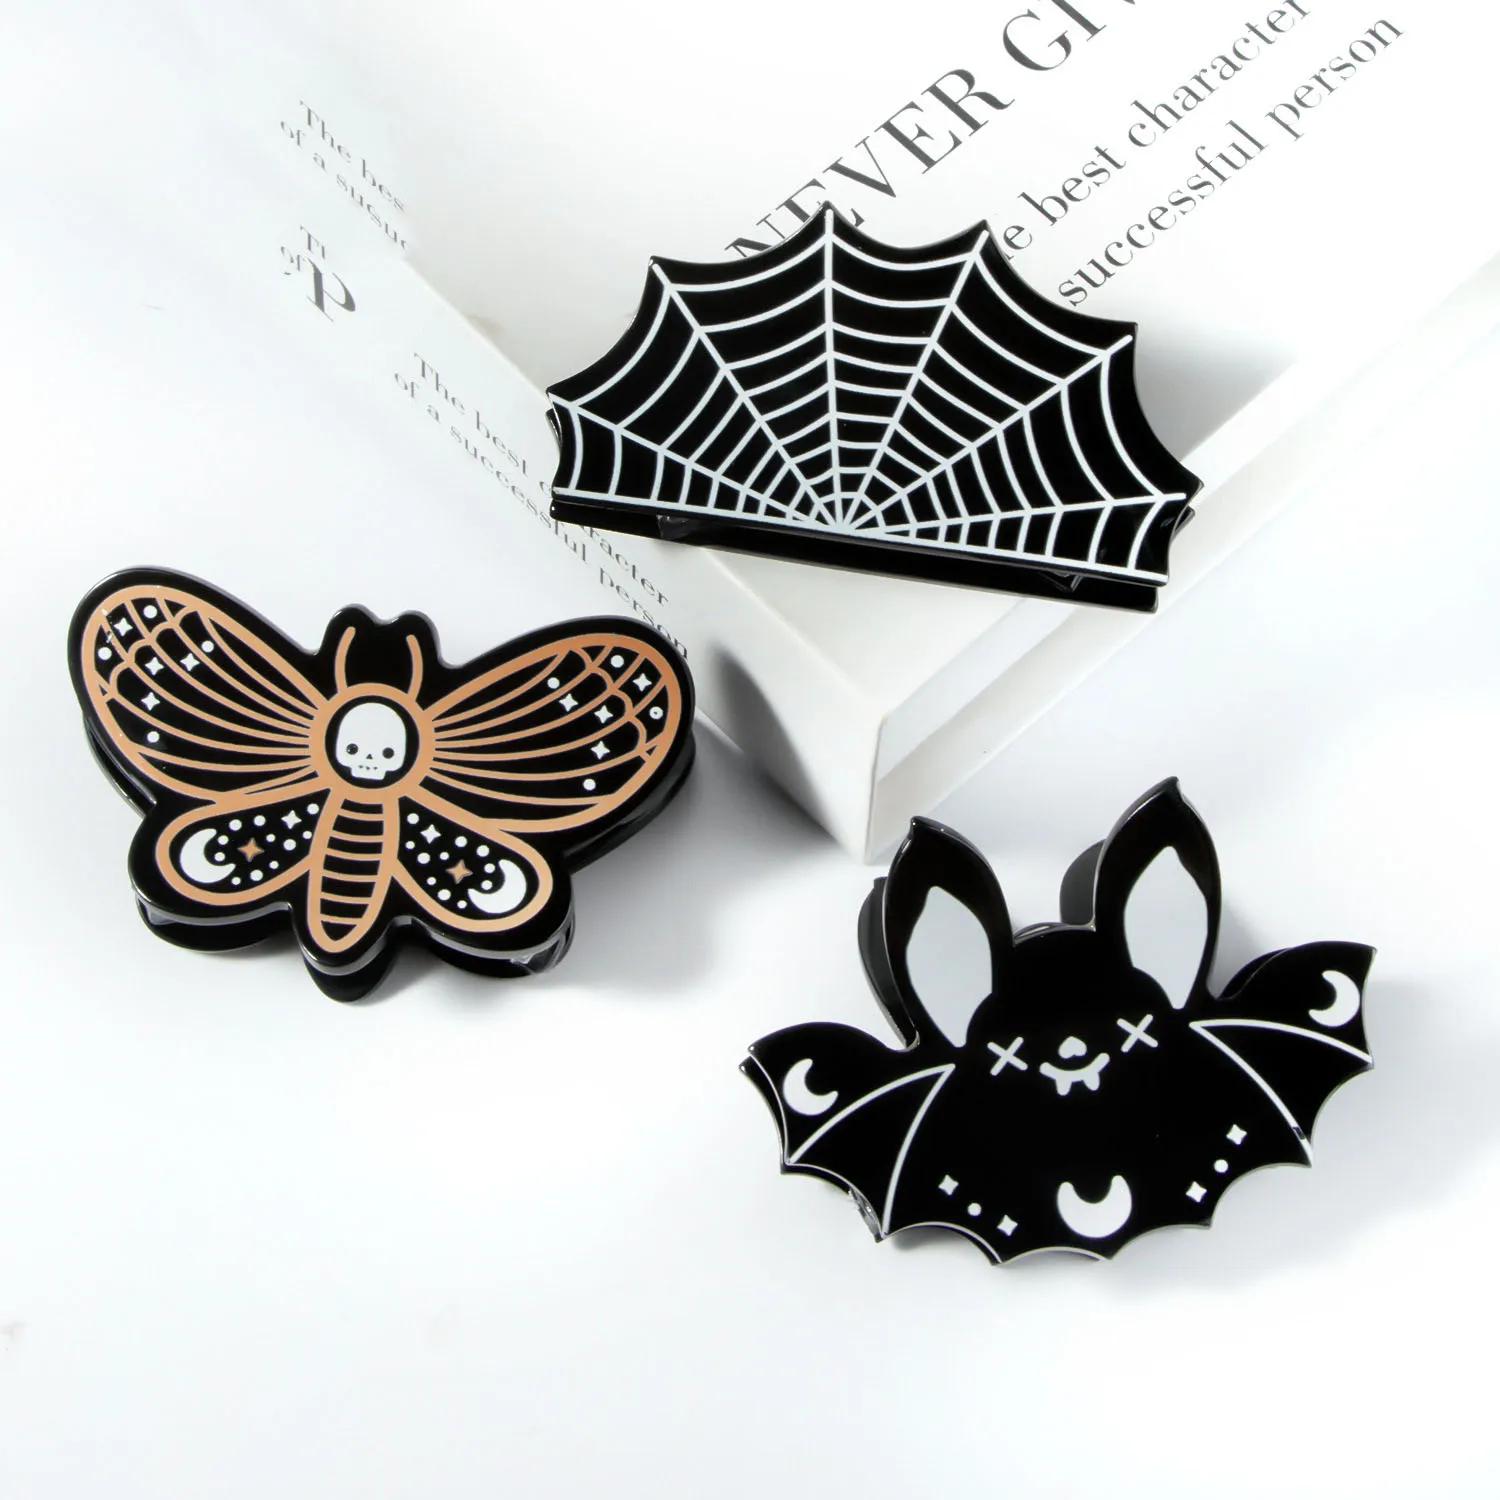 

Dark Dragonfly Bat Spider Web Hair Clips Horror Exaggerates Halloween Hair Accessories for Women Kid New Funny Hairpin